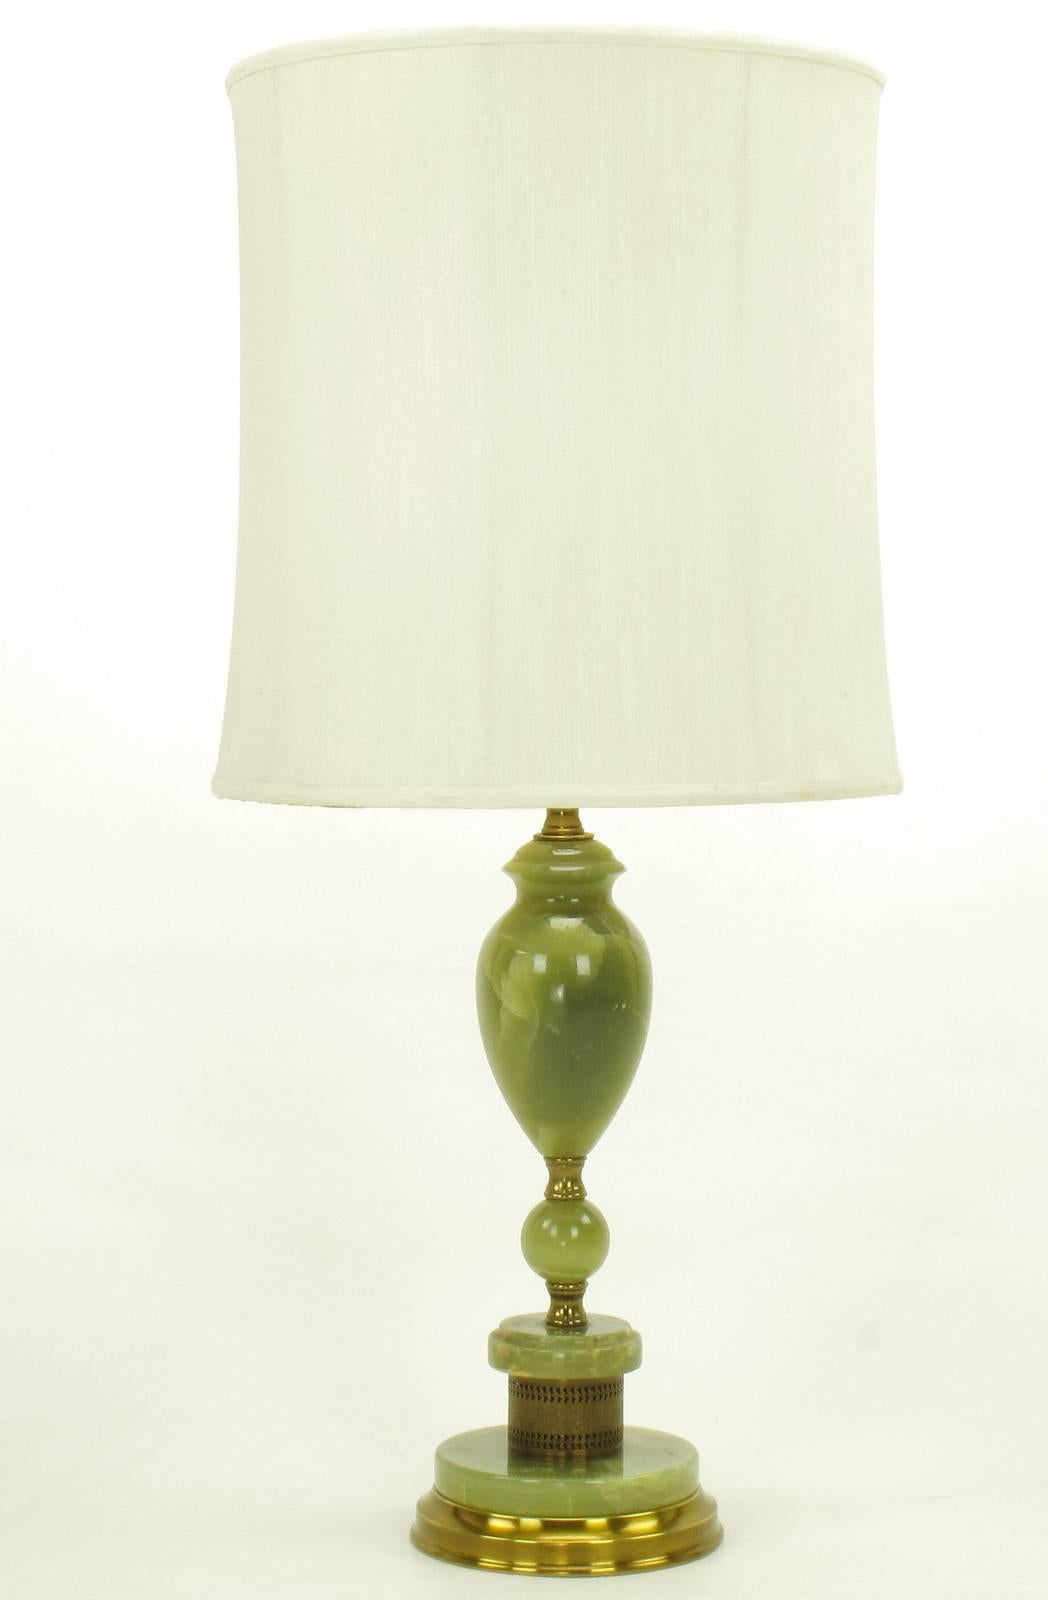 Pair of 1940s green onyx table lamps with solid and pierced brass spacers. Segmented solid onyx spheres and discs with urn shaped body. Rewired and restored with new double socket clusters and ball and chain pulls switches. Sold sans shades.